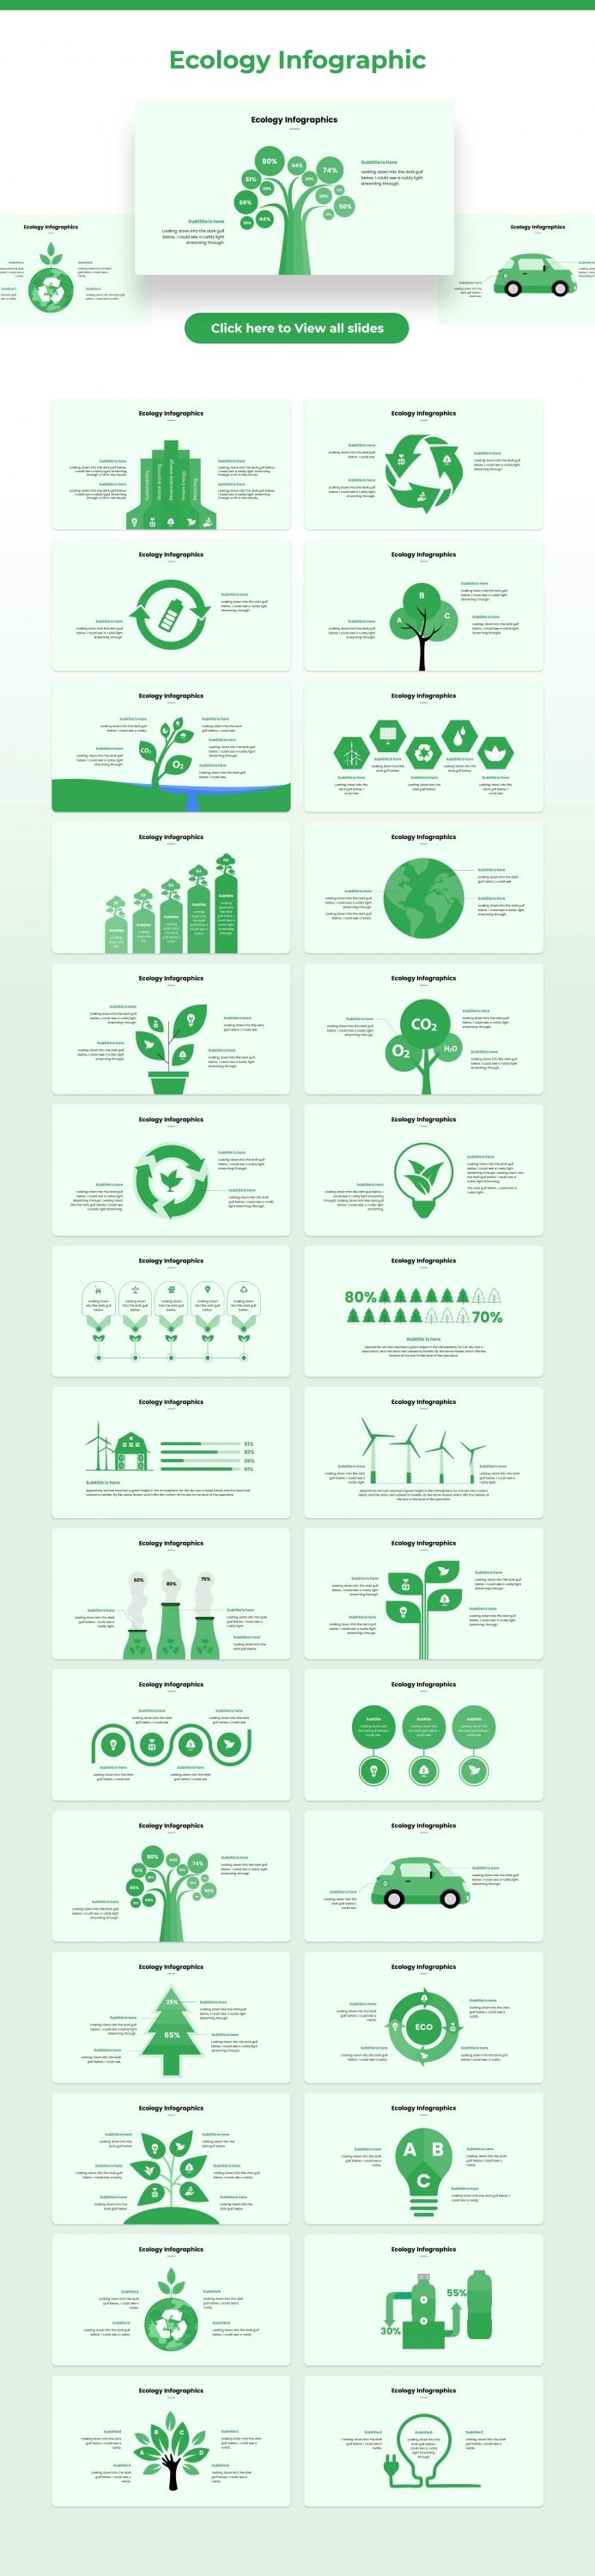 There is ecological infographic in green color with many elements.